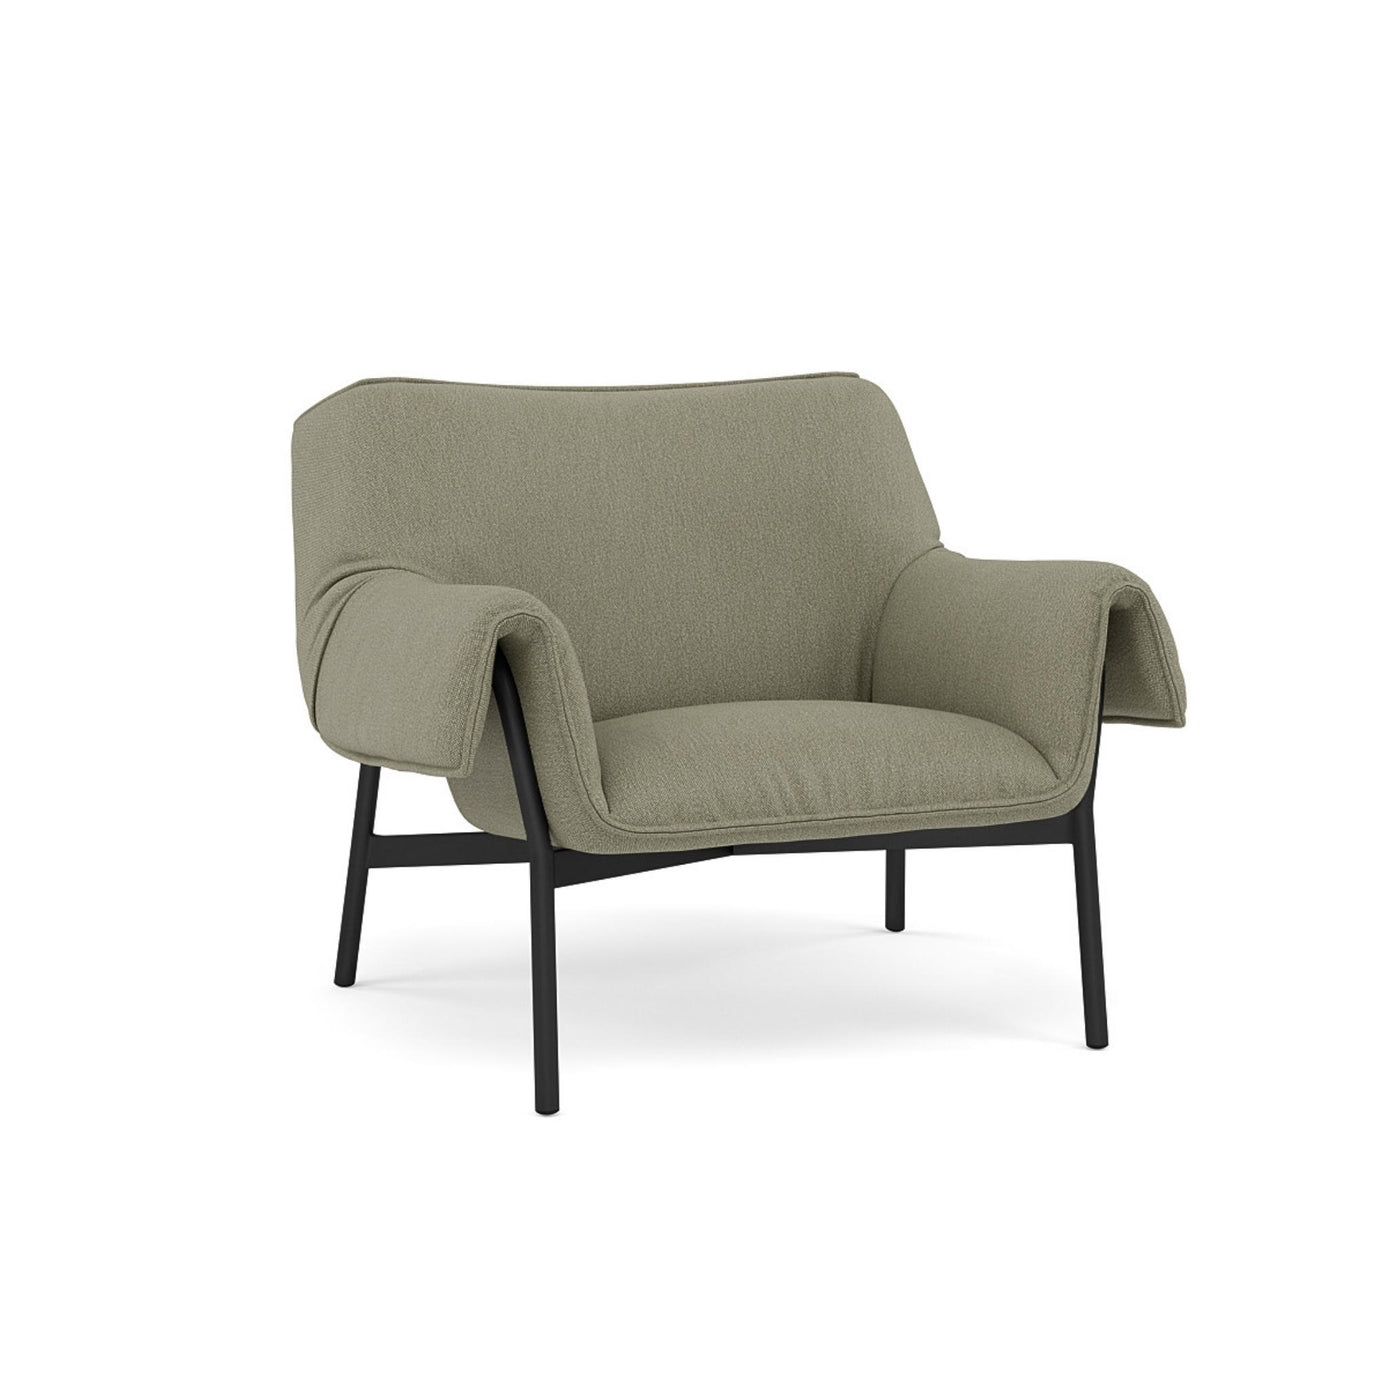 Muuto Wrap Lounge Chair. Made to order from someday designs. #colour_clay-15